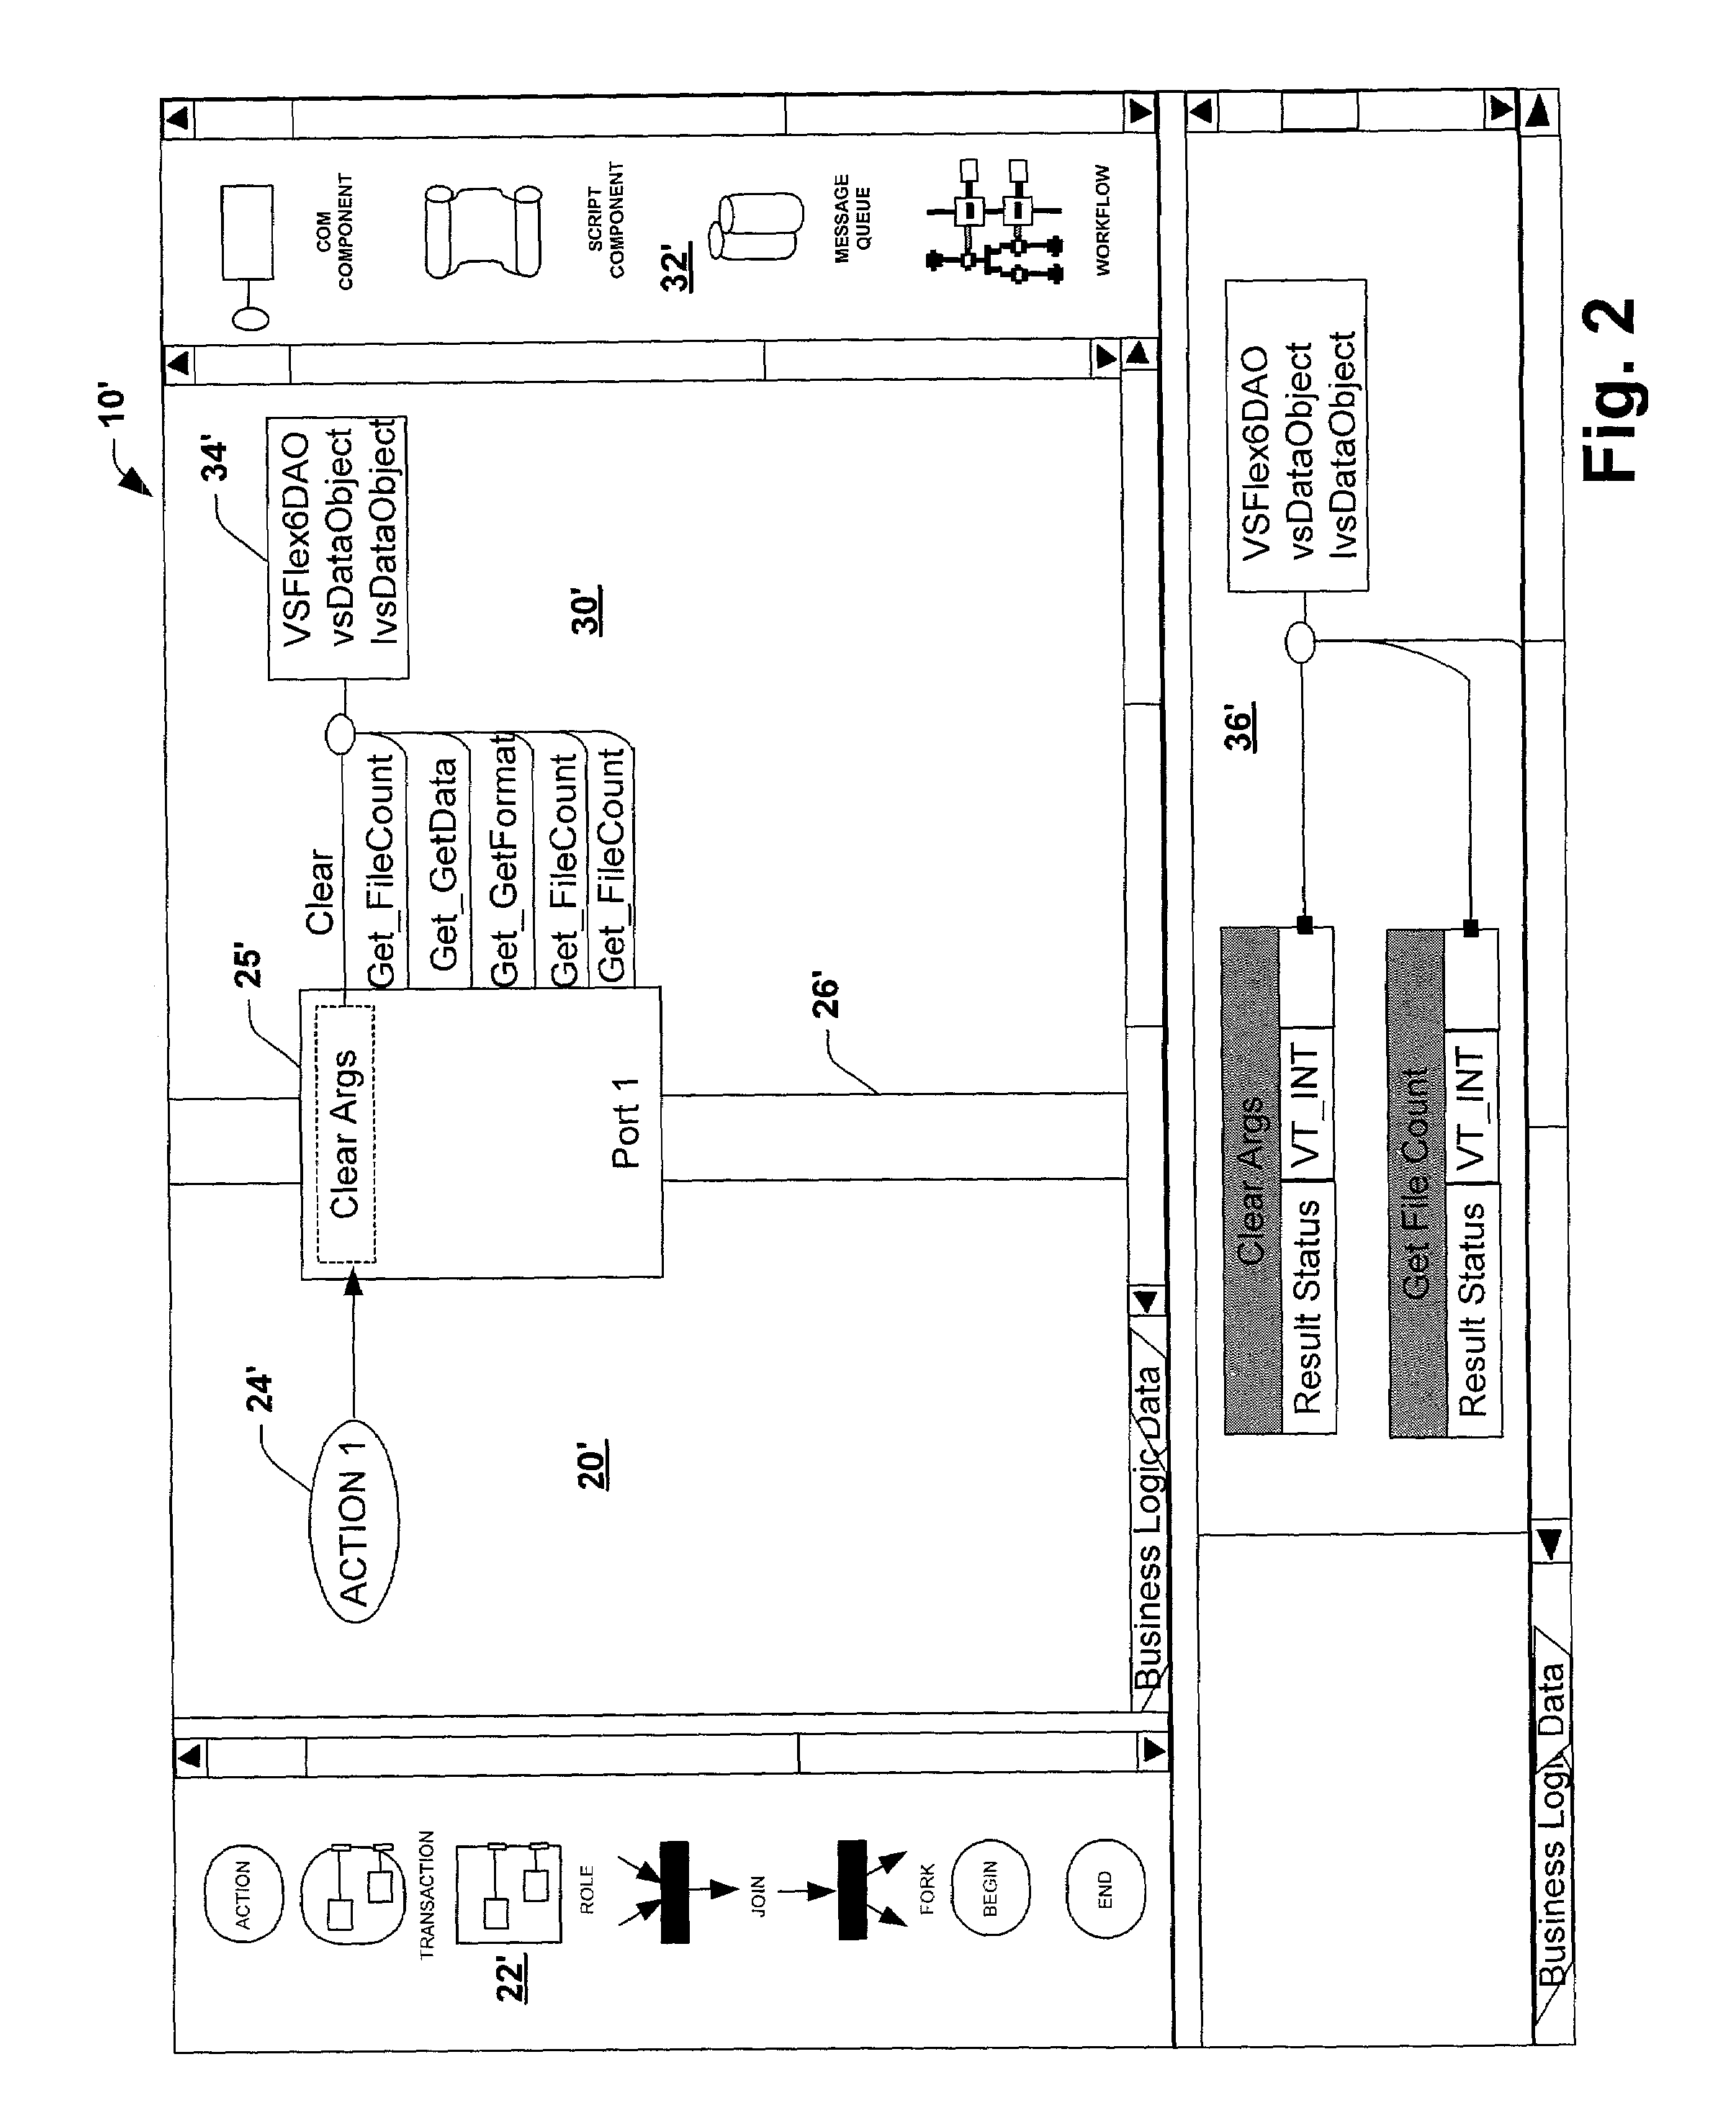 System and method utilizing a graphical user interface of a business process workflow scheduling program